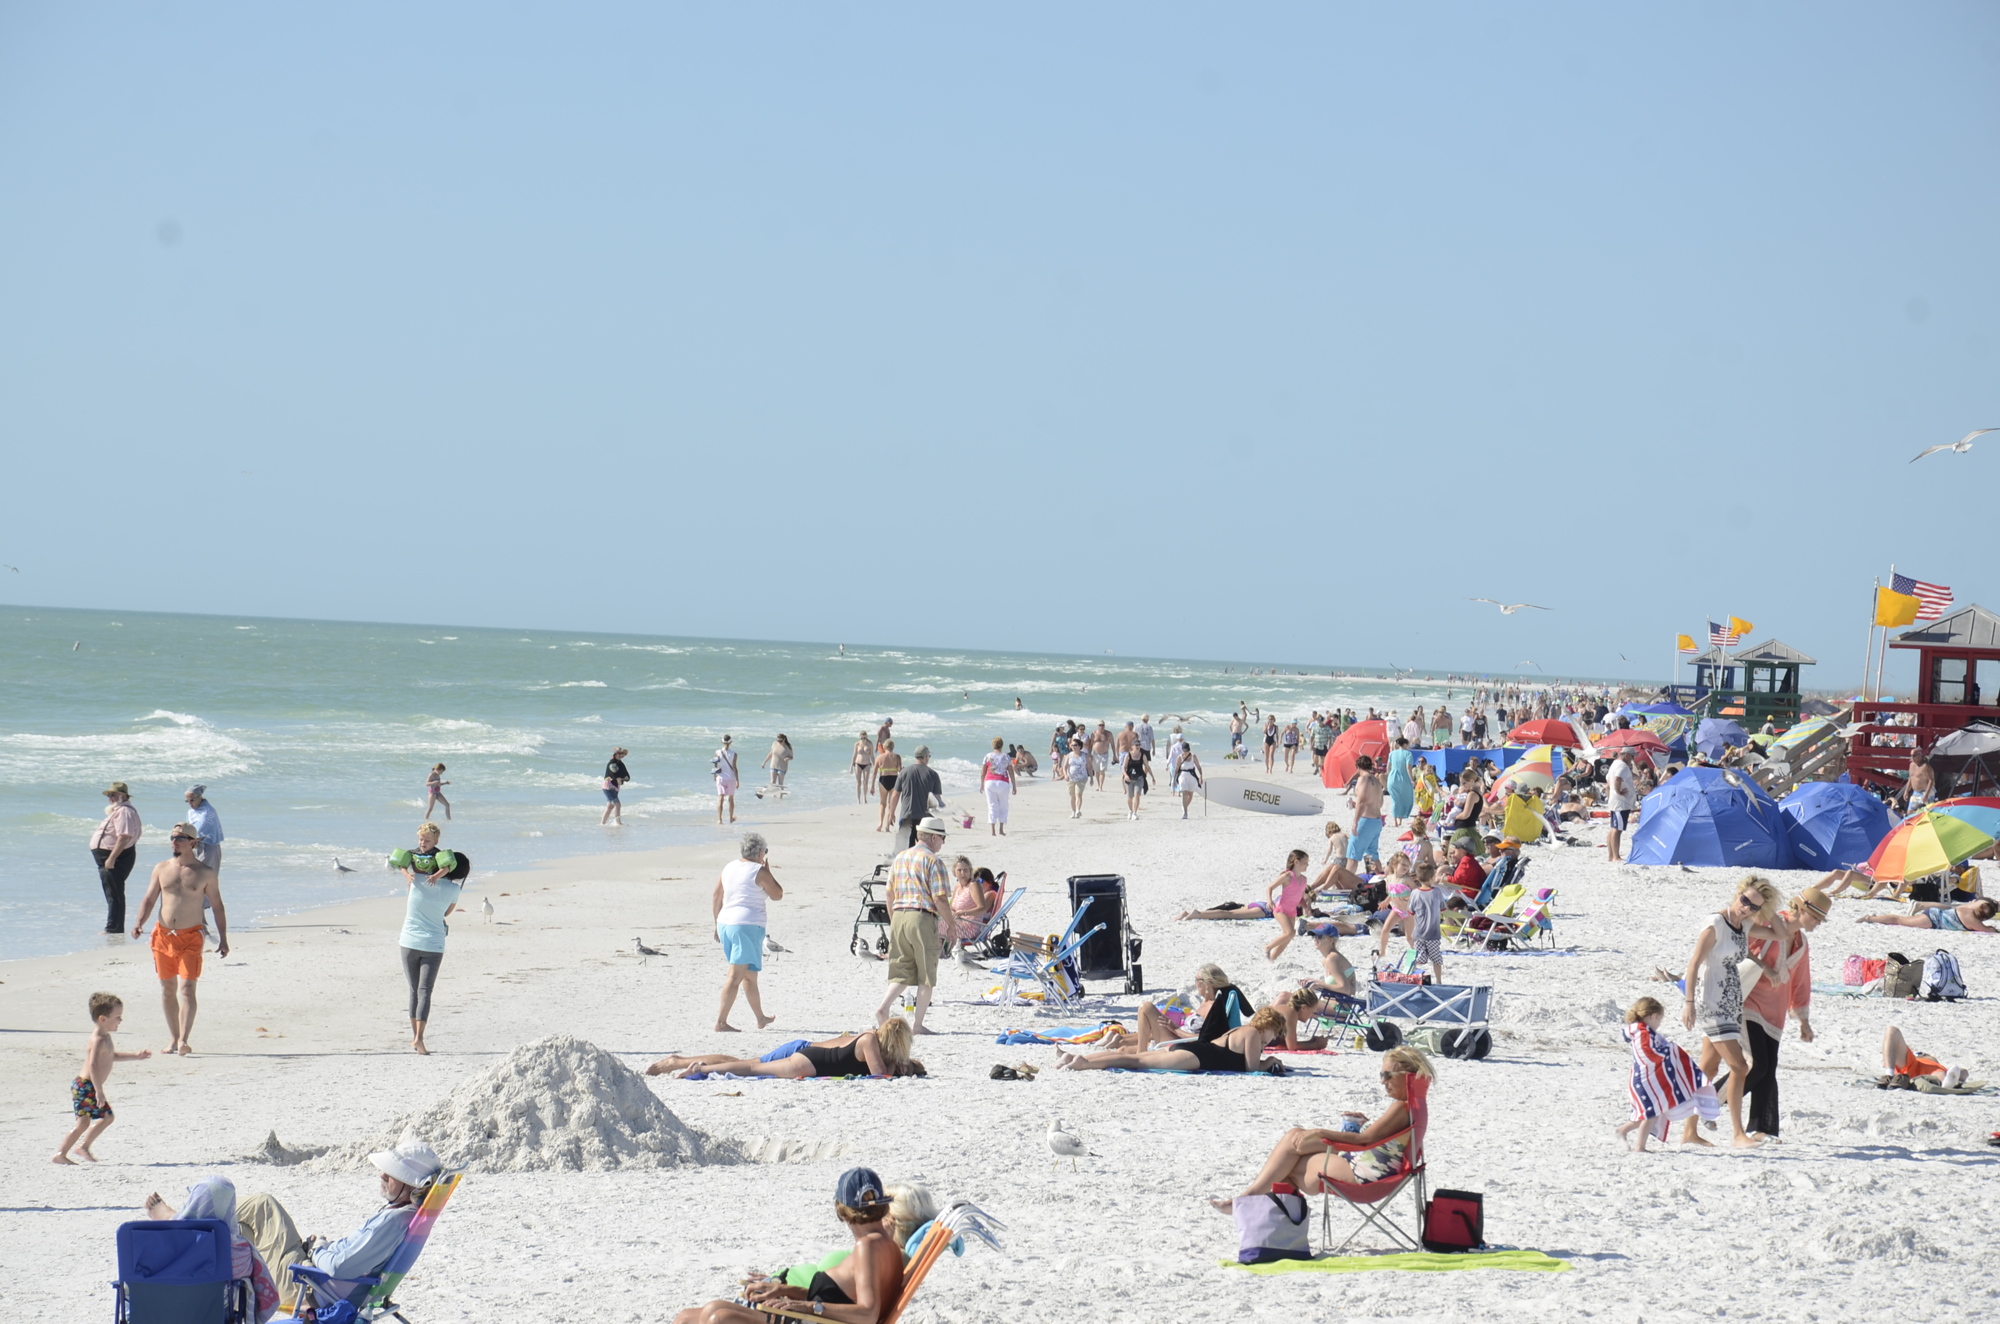 Siesta Key is located in the unincorporated areas of Sarasota County, which saw a 1.6% population increase in 2014.